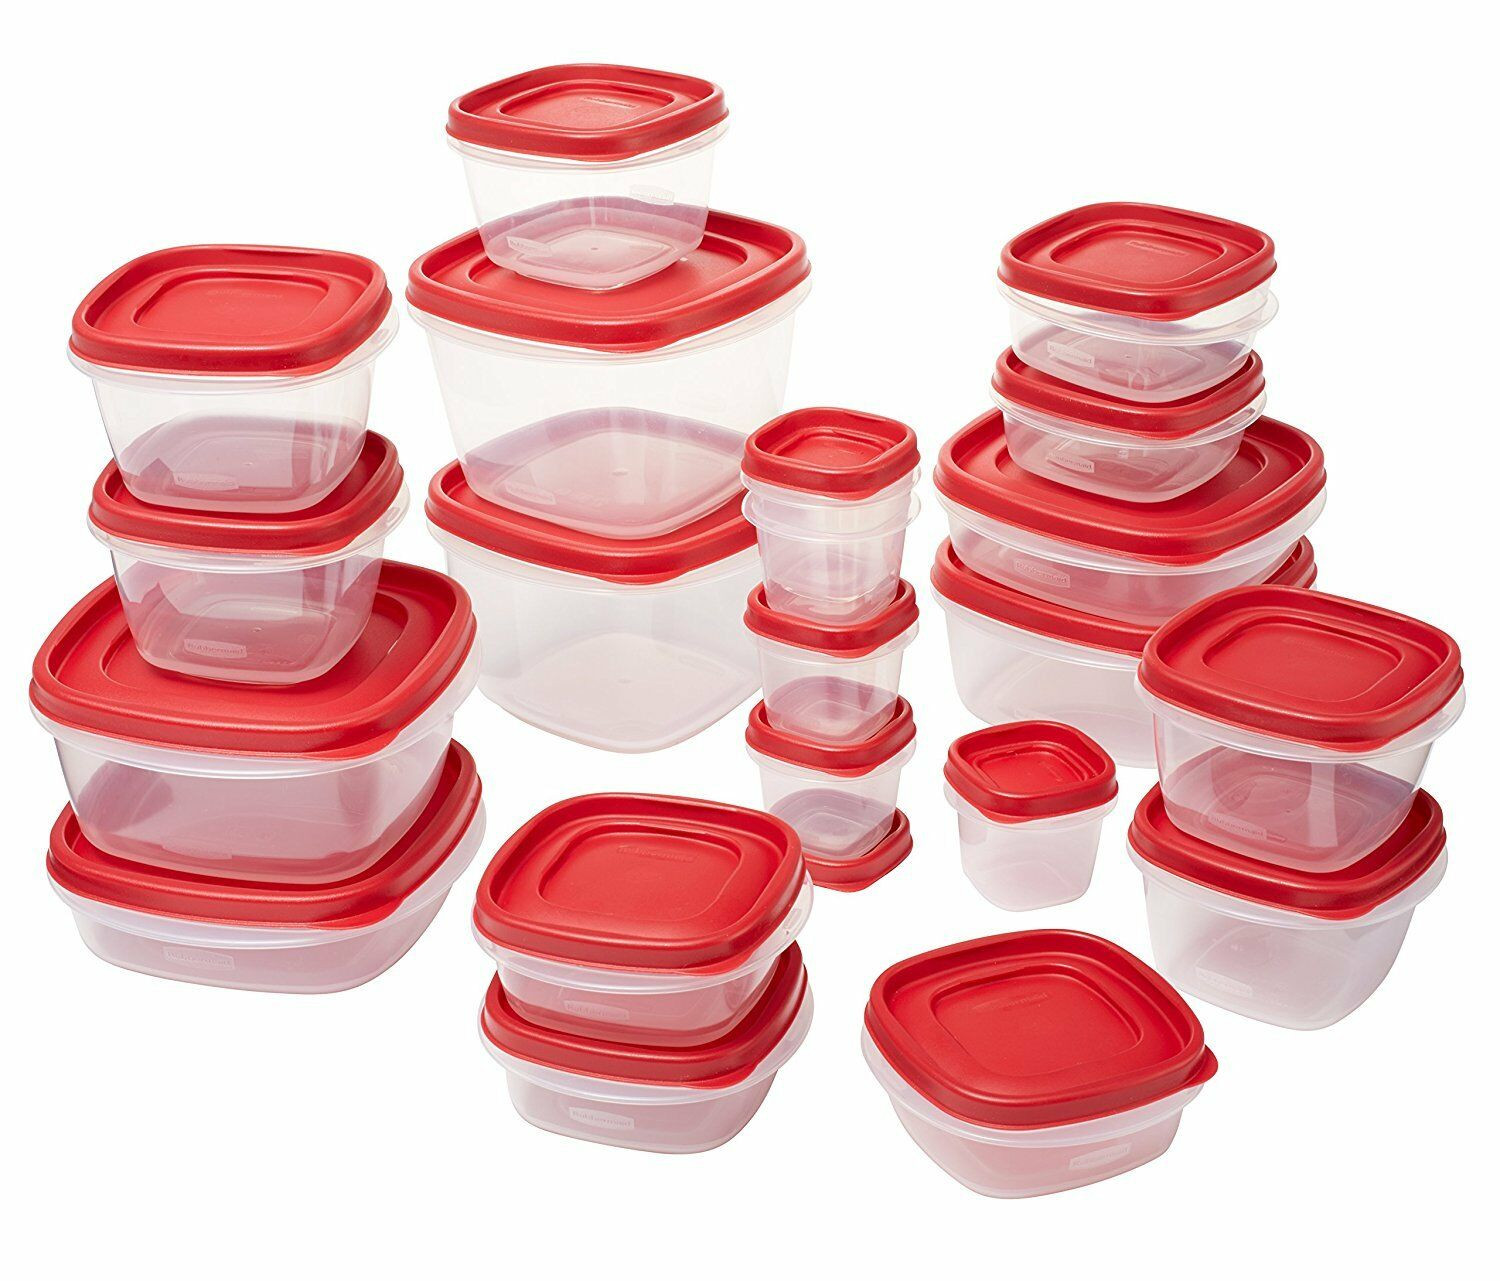 Rubbermaid Kitchen Storage
 Rubbermaid Easy Find Lids Food Storage Containers 8 Sets